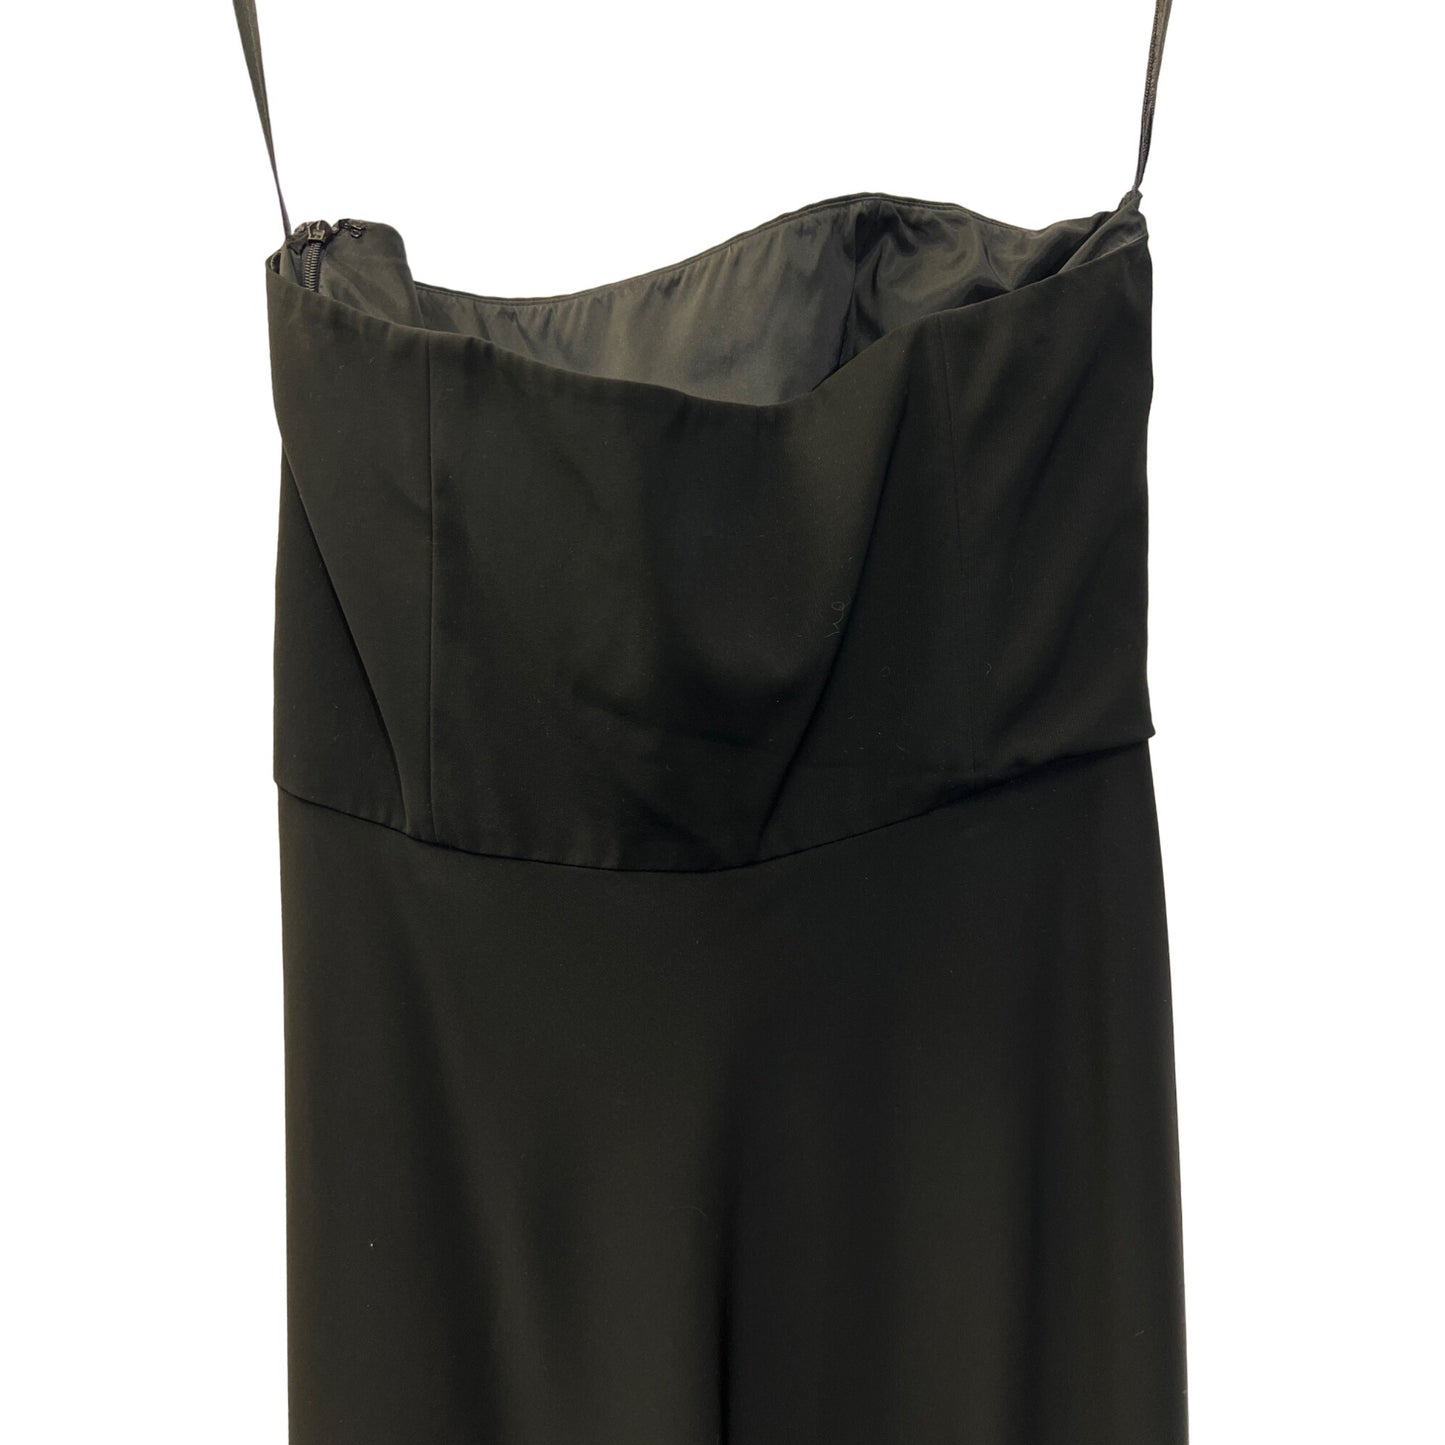 Banana Republic Black Strapless A-Line Fit and Flare Dress